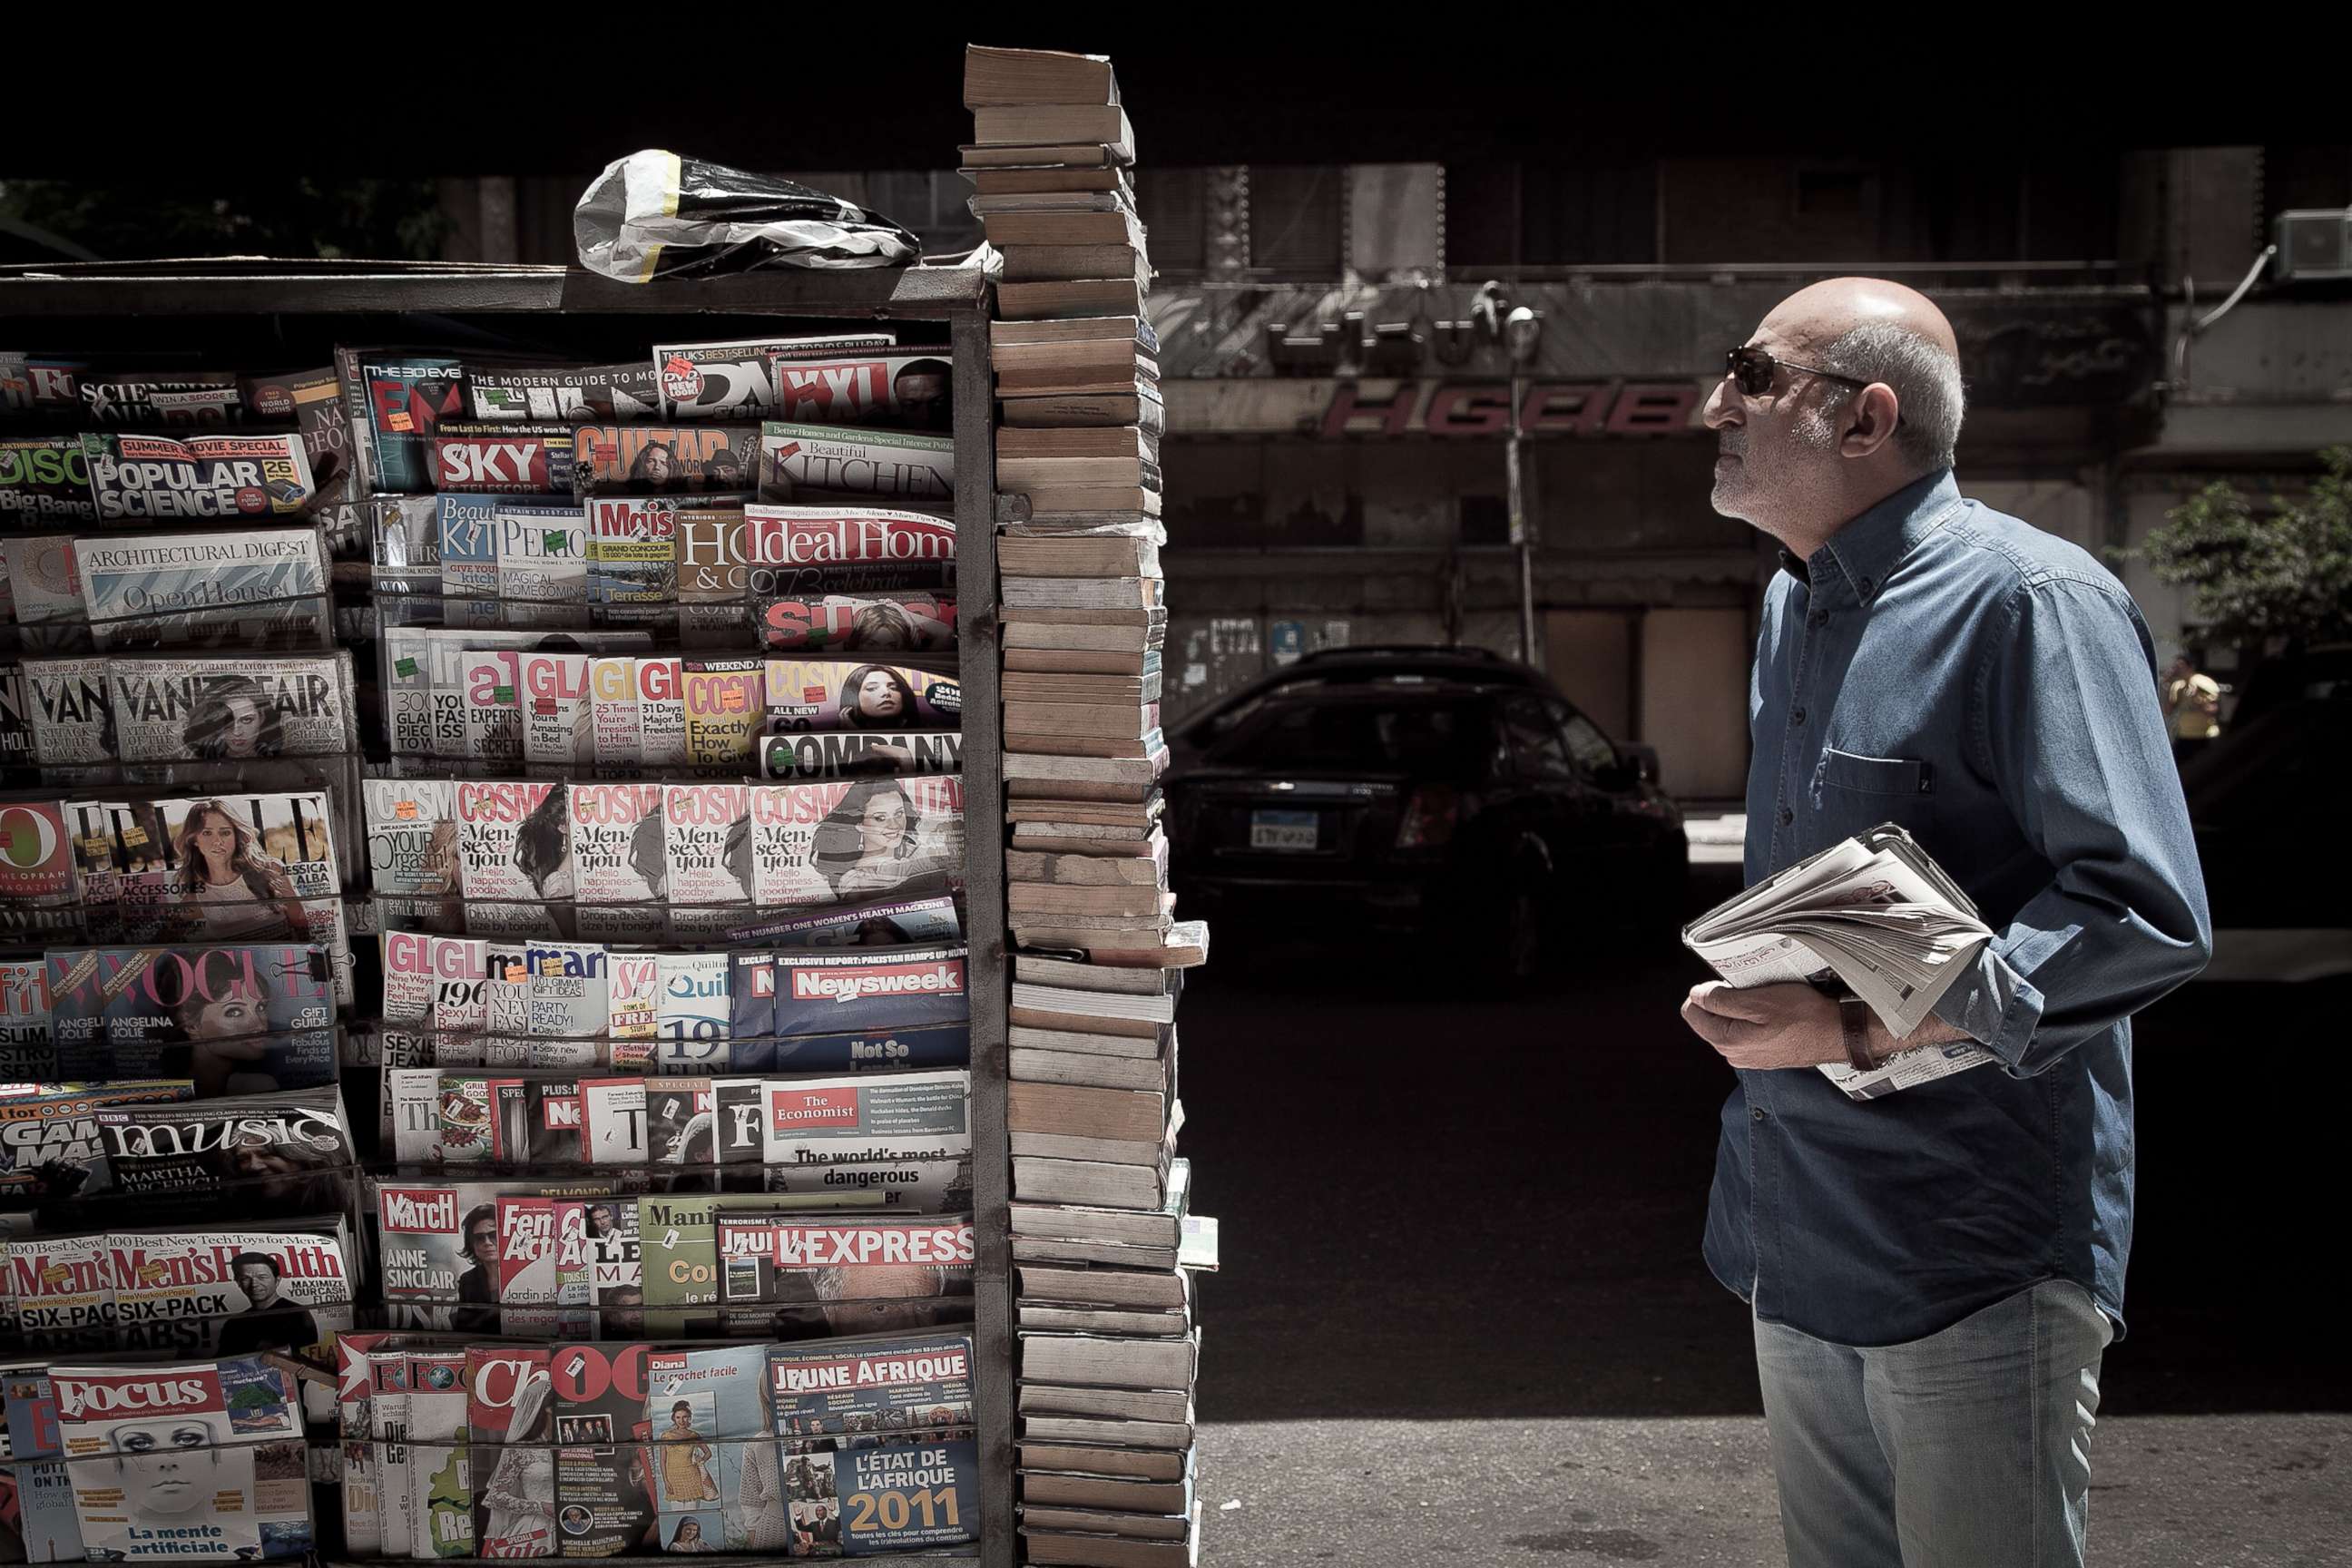 PHOTO: Newspaper kiosks are pictured in Zamalek, May 17, 2011 in Cairo, Egypt.